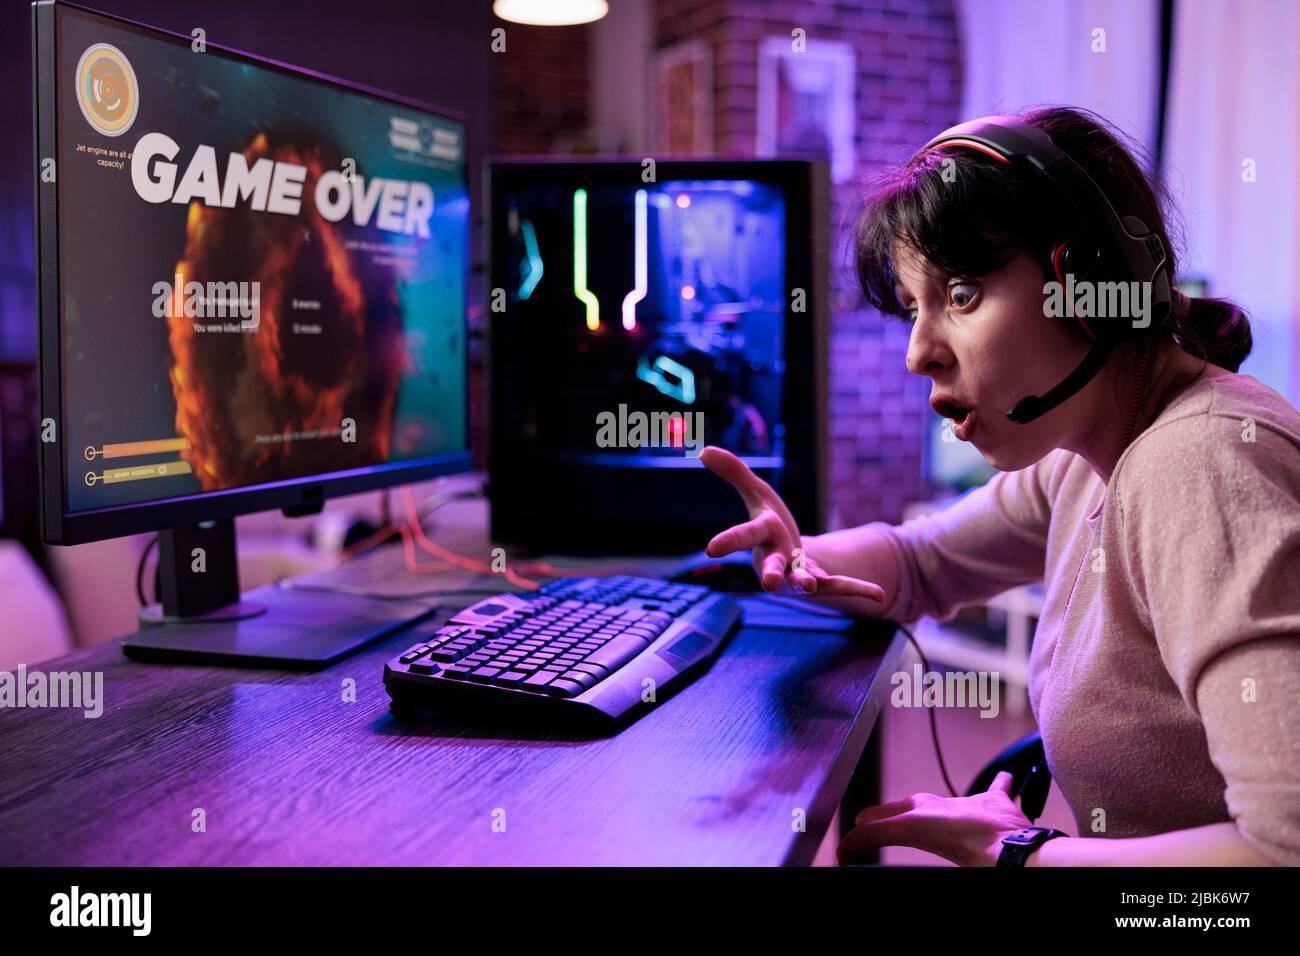 Frustrated woman losing video games tournament on pc, feeling sad about lost shooting gameplay competititon. Female gamer playing online rpg action championship on live stream. Stock Photo